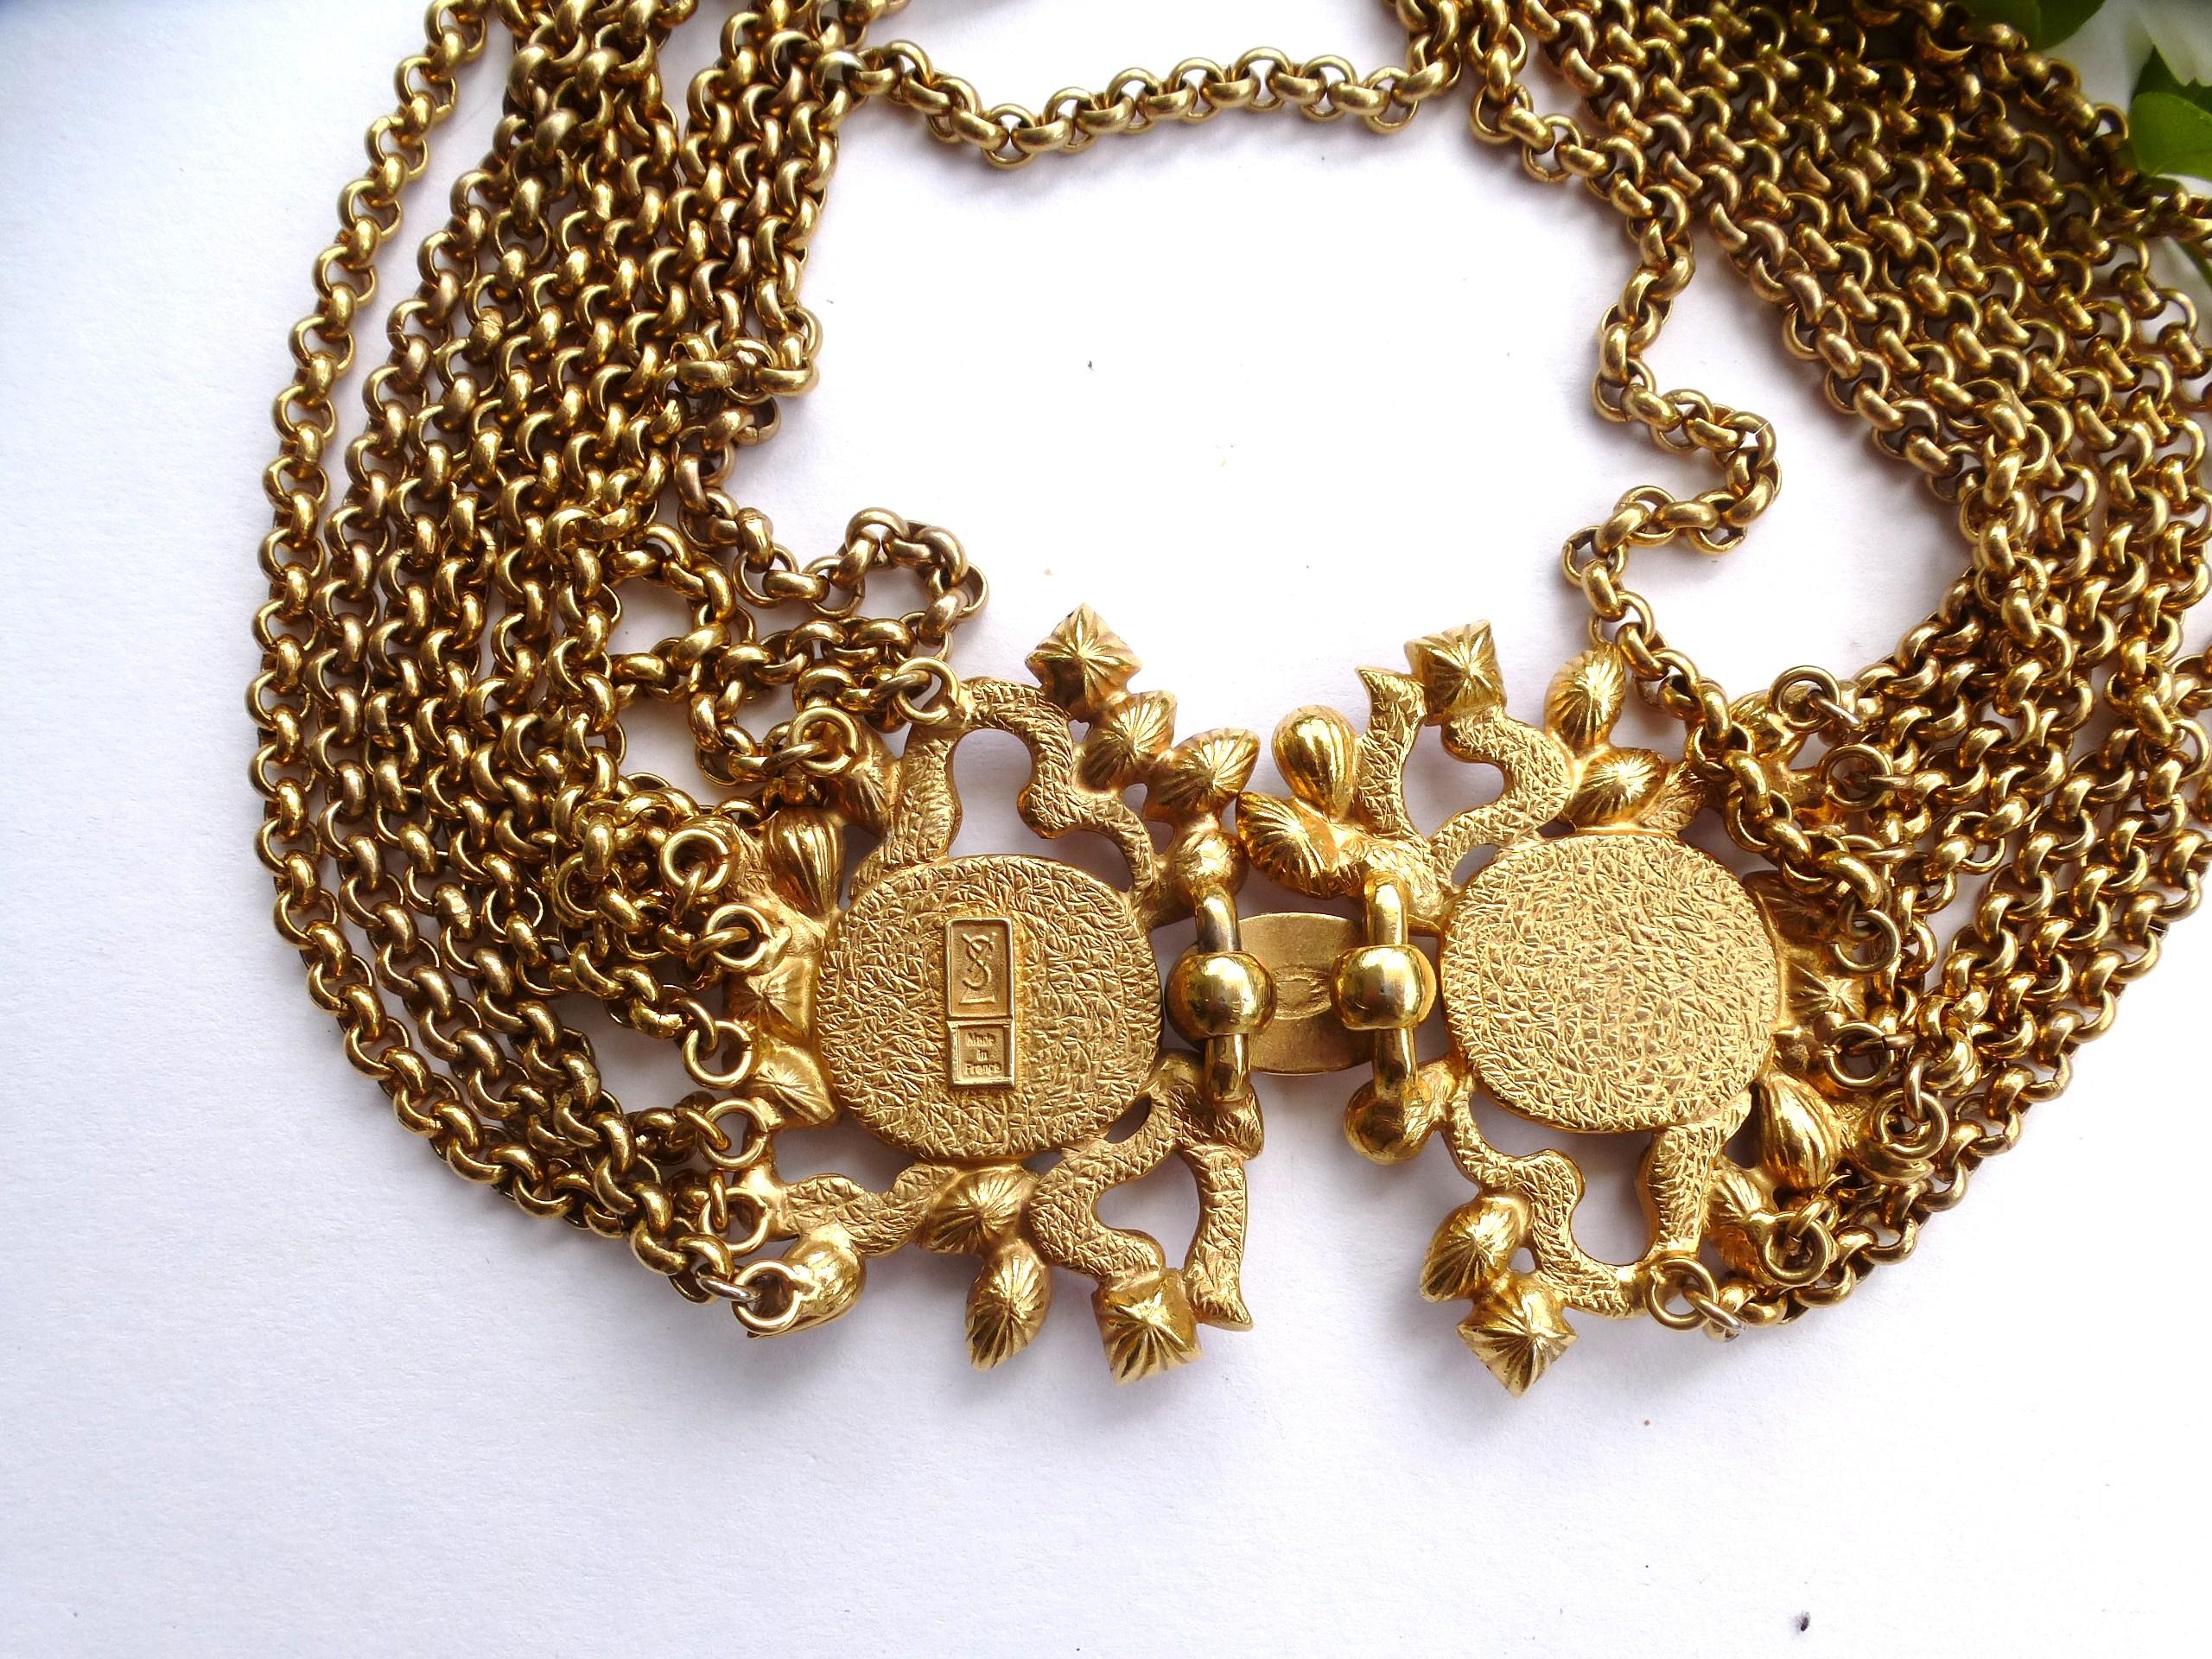 Yves Sant Laurent chain necklace made by R. Goossens Paris gold plated 70's 1